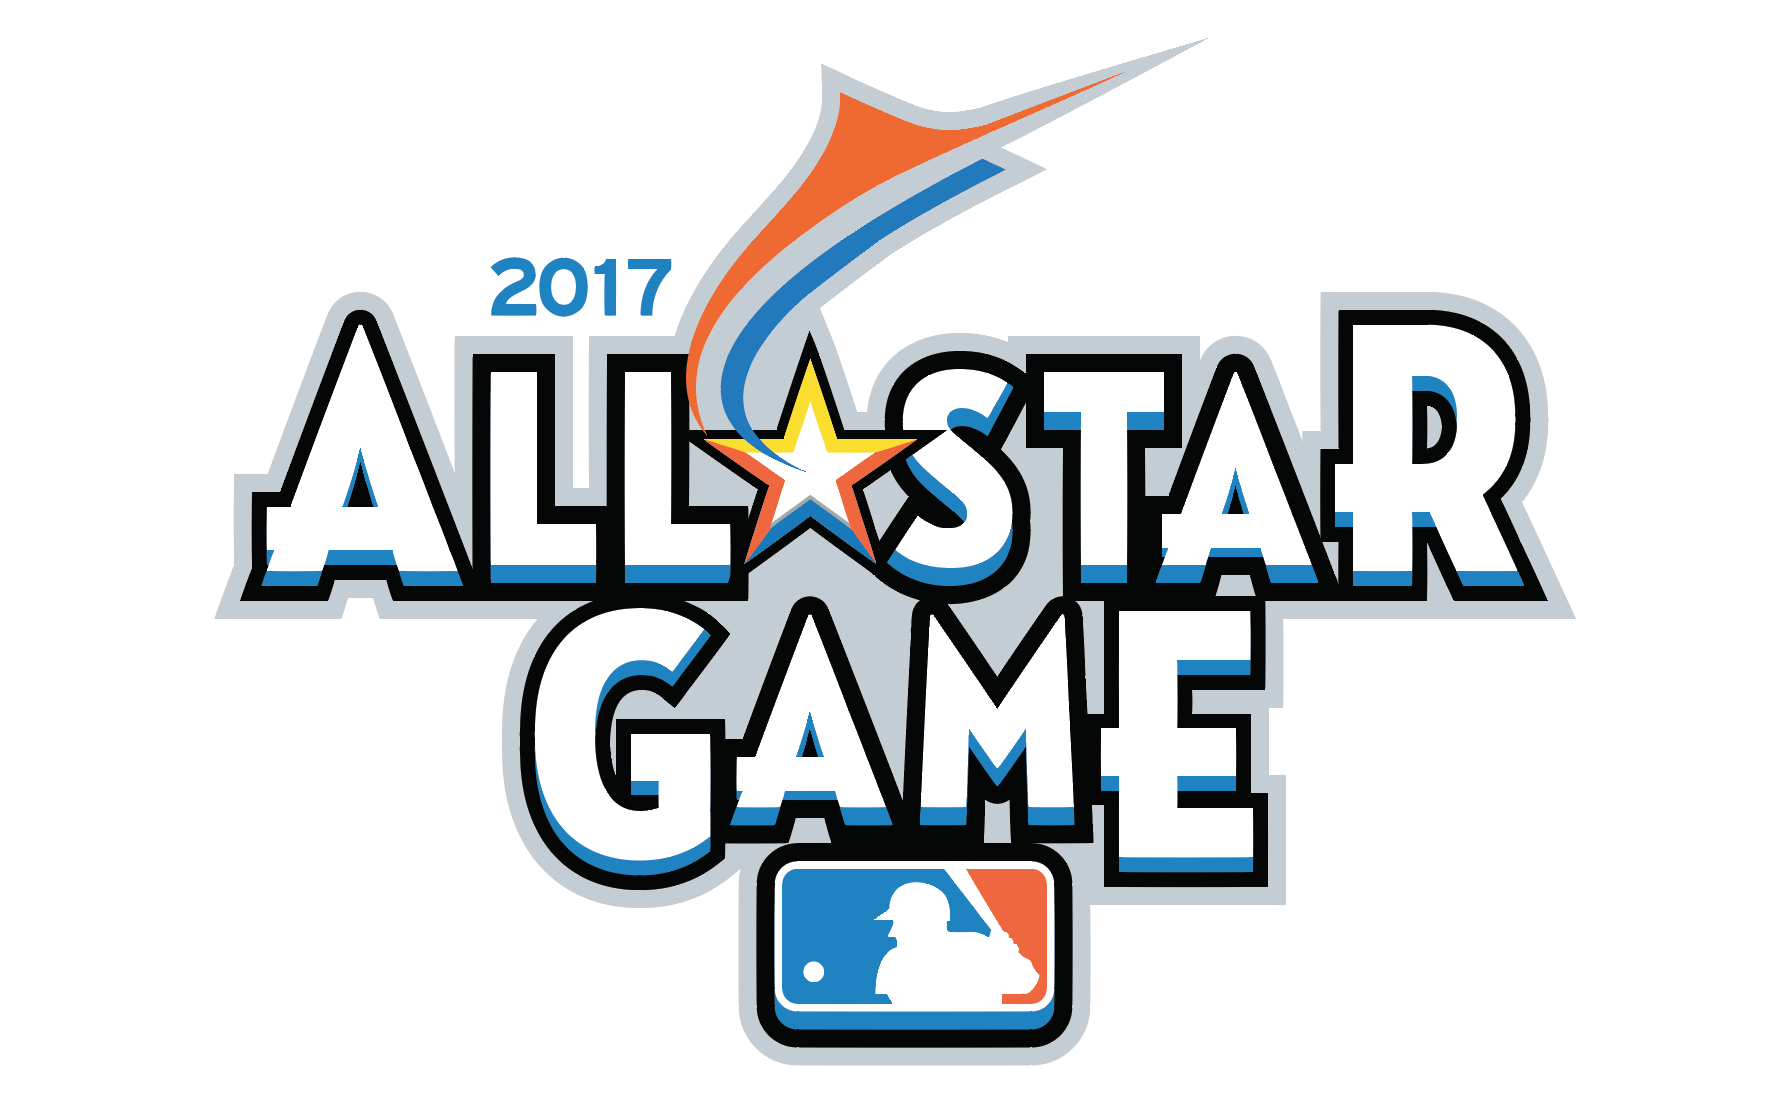 All-Star Game Logo - 2017 MLB All-Star Game - The Chazz Rockwell Blog